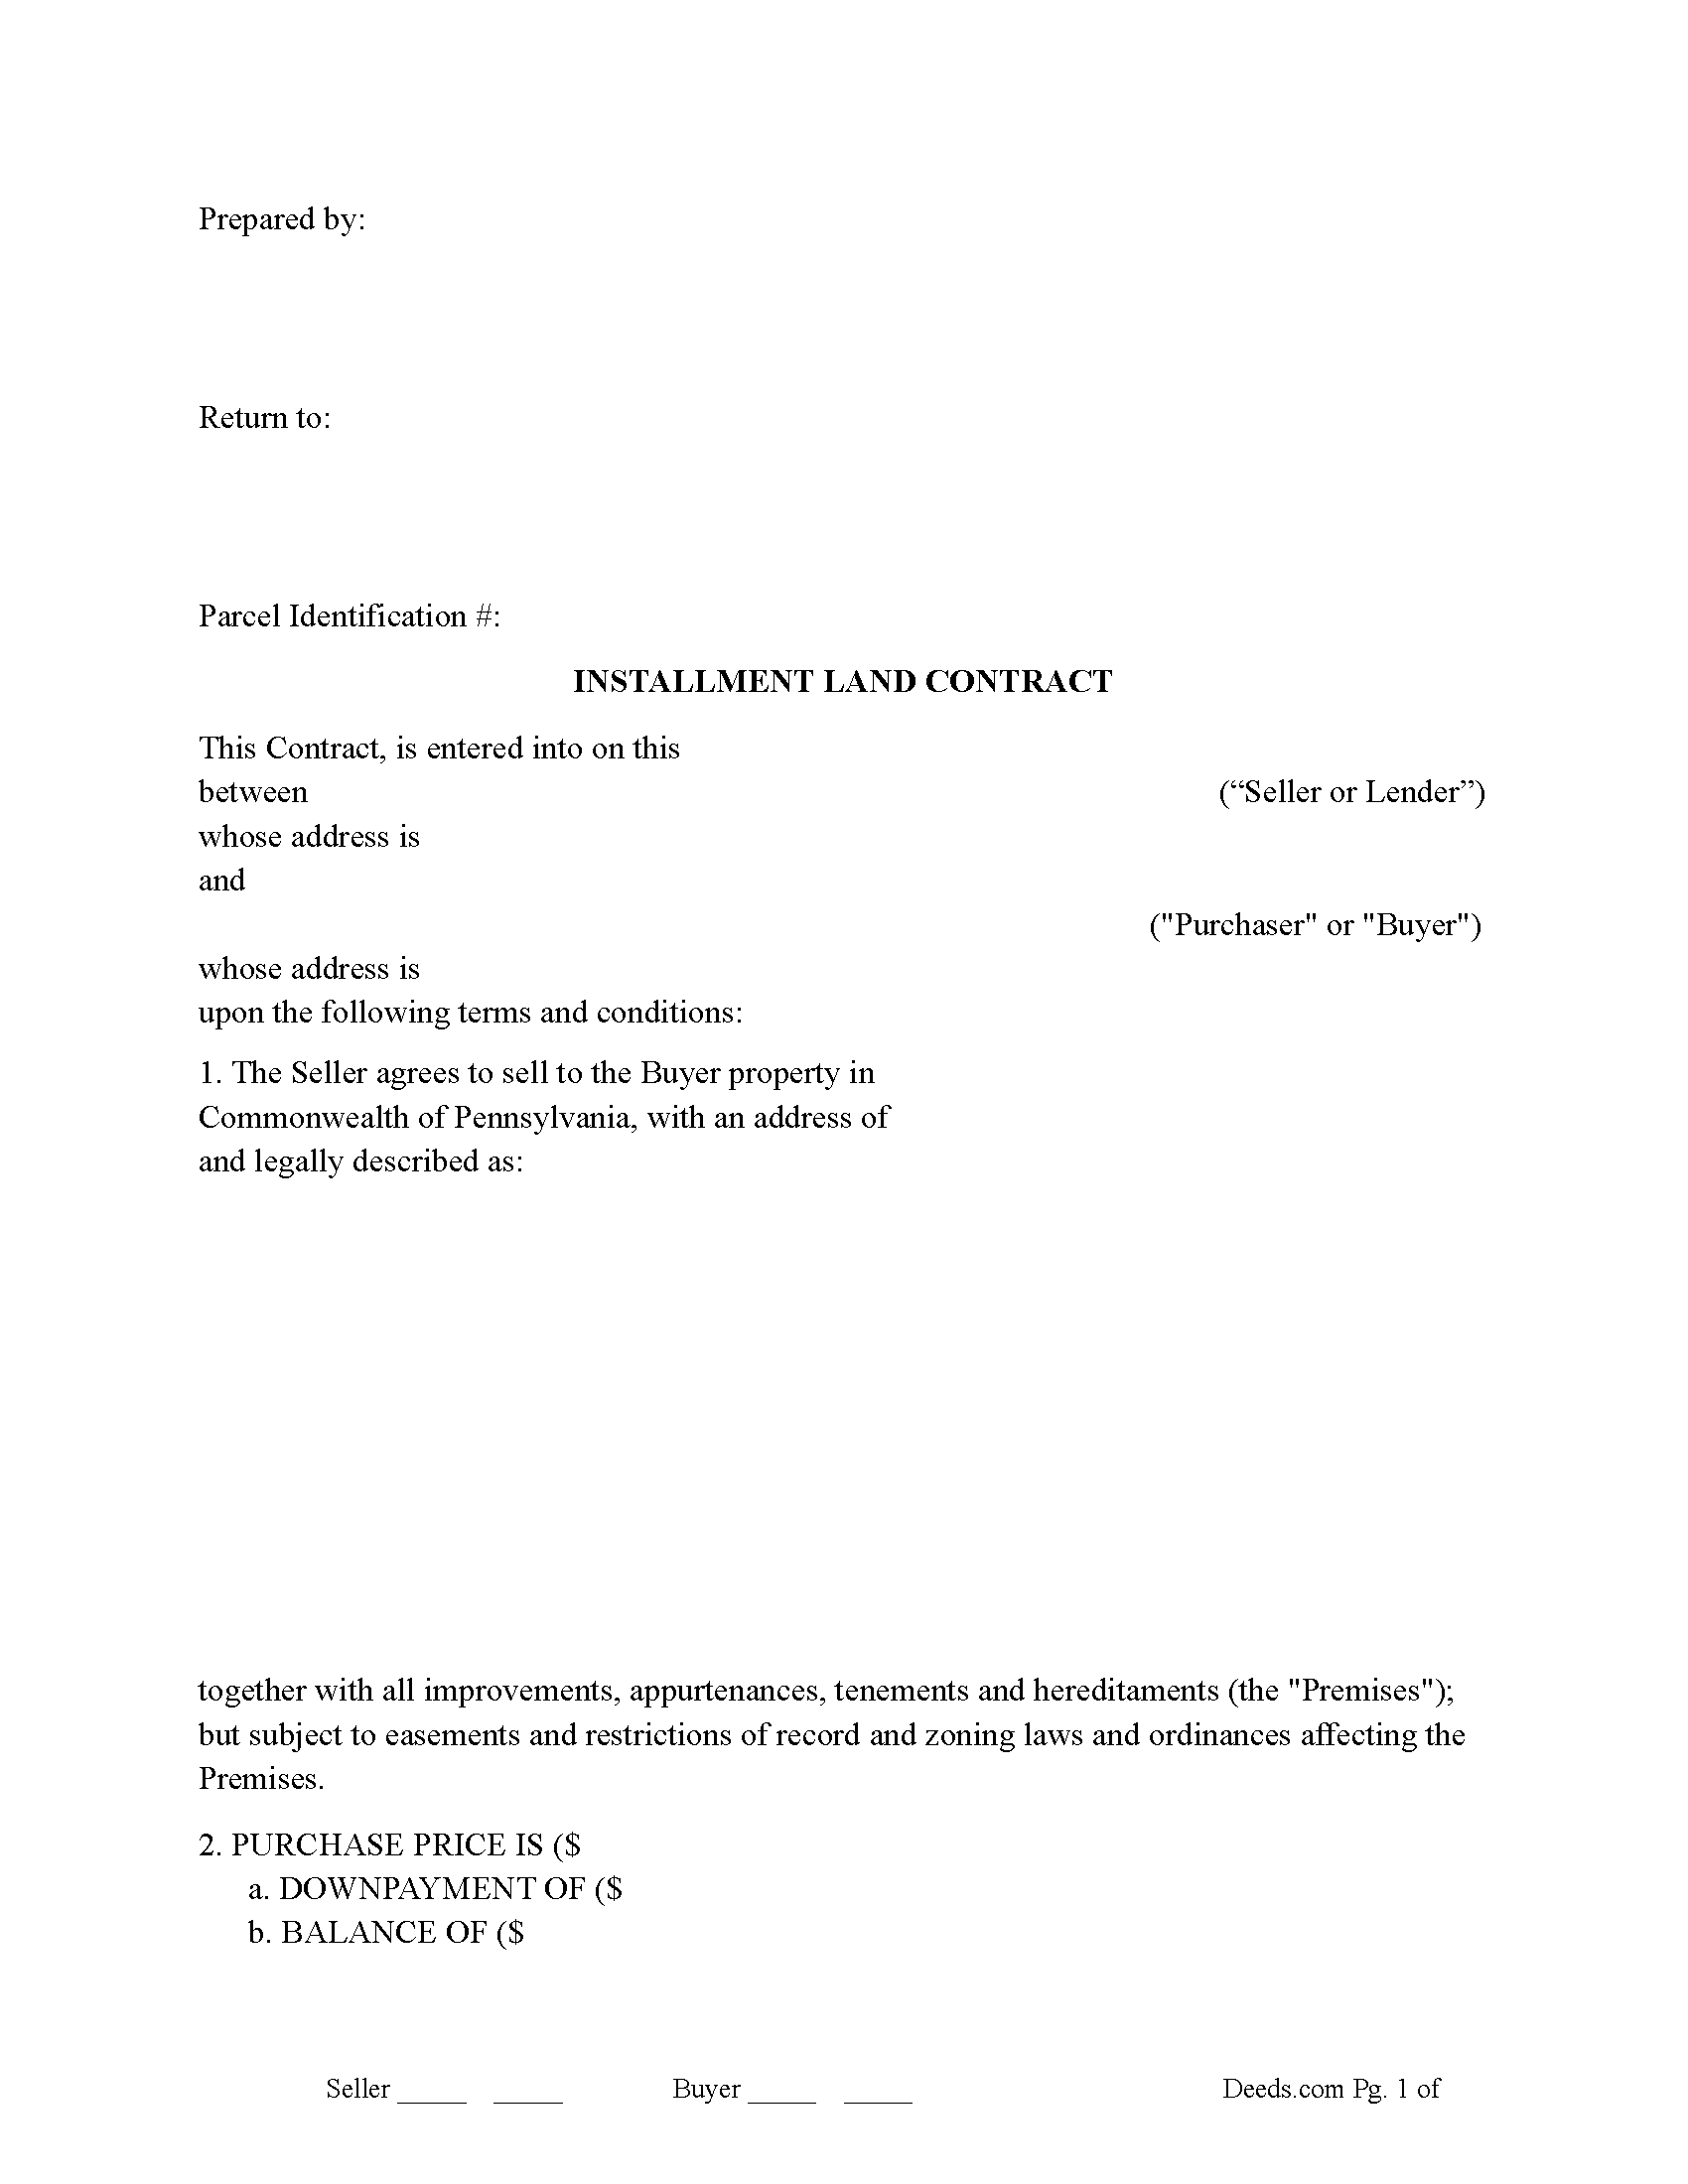 Pike County Installment Land Contract Form